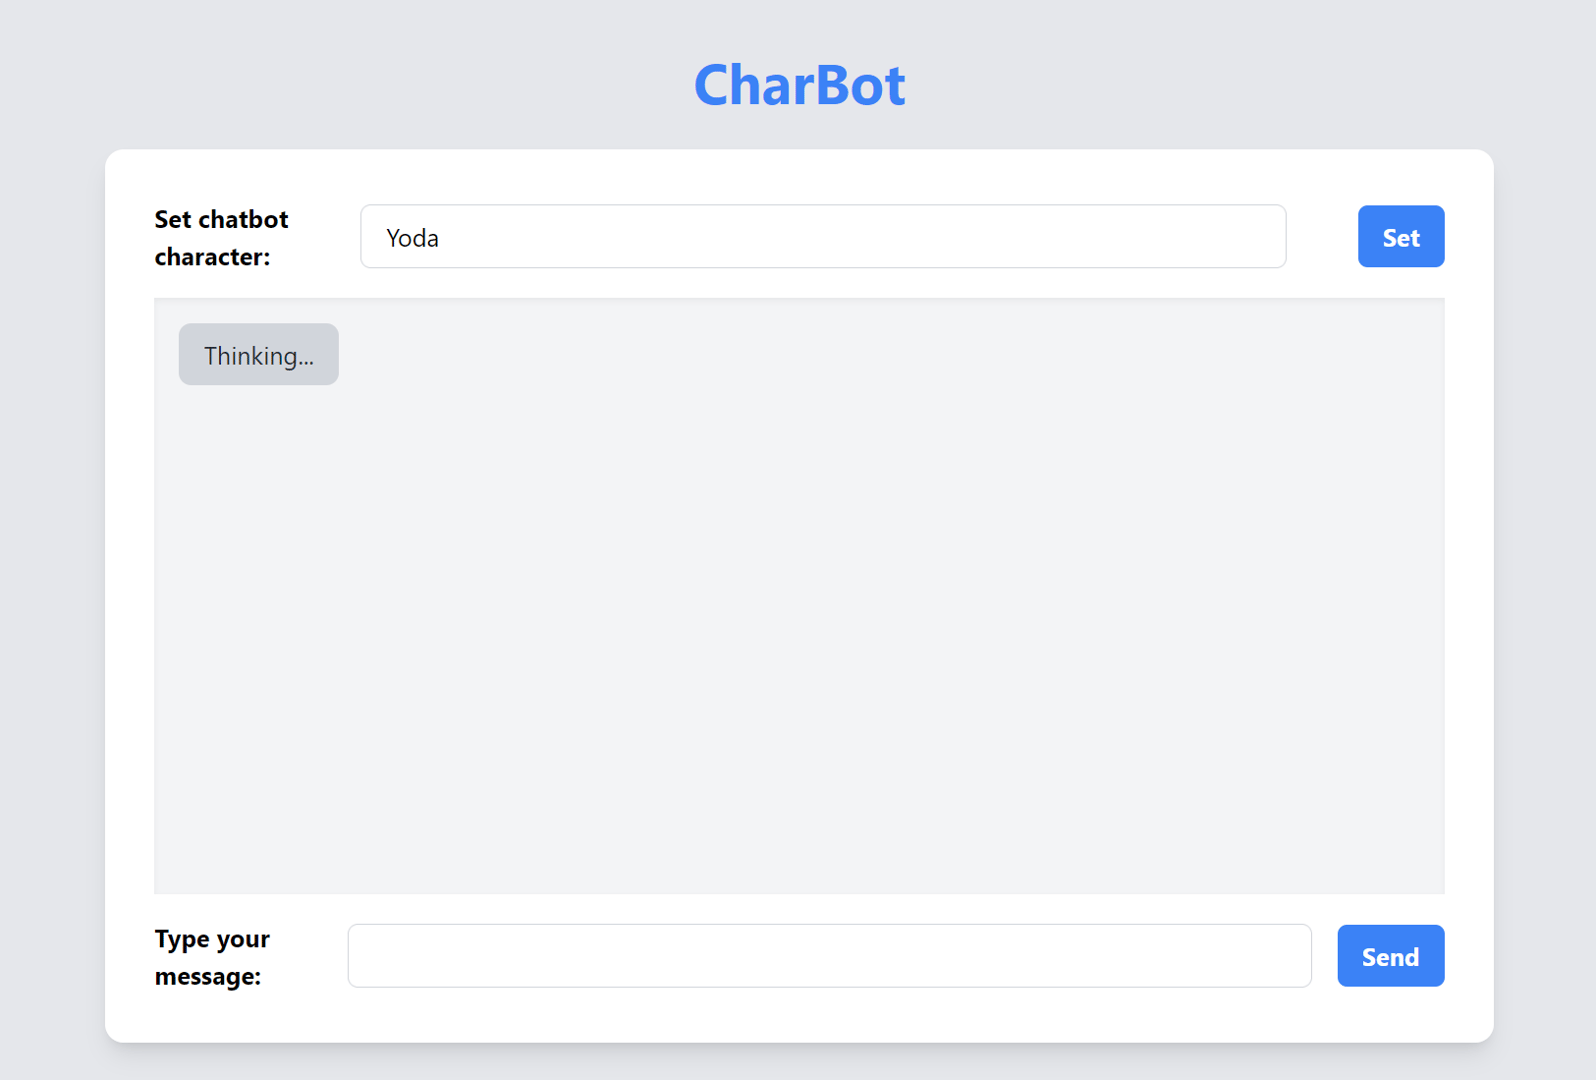 Type in the name of Yoda in the input text, the bot should indicate loading